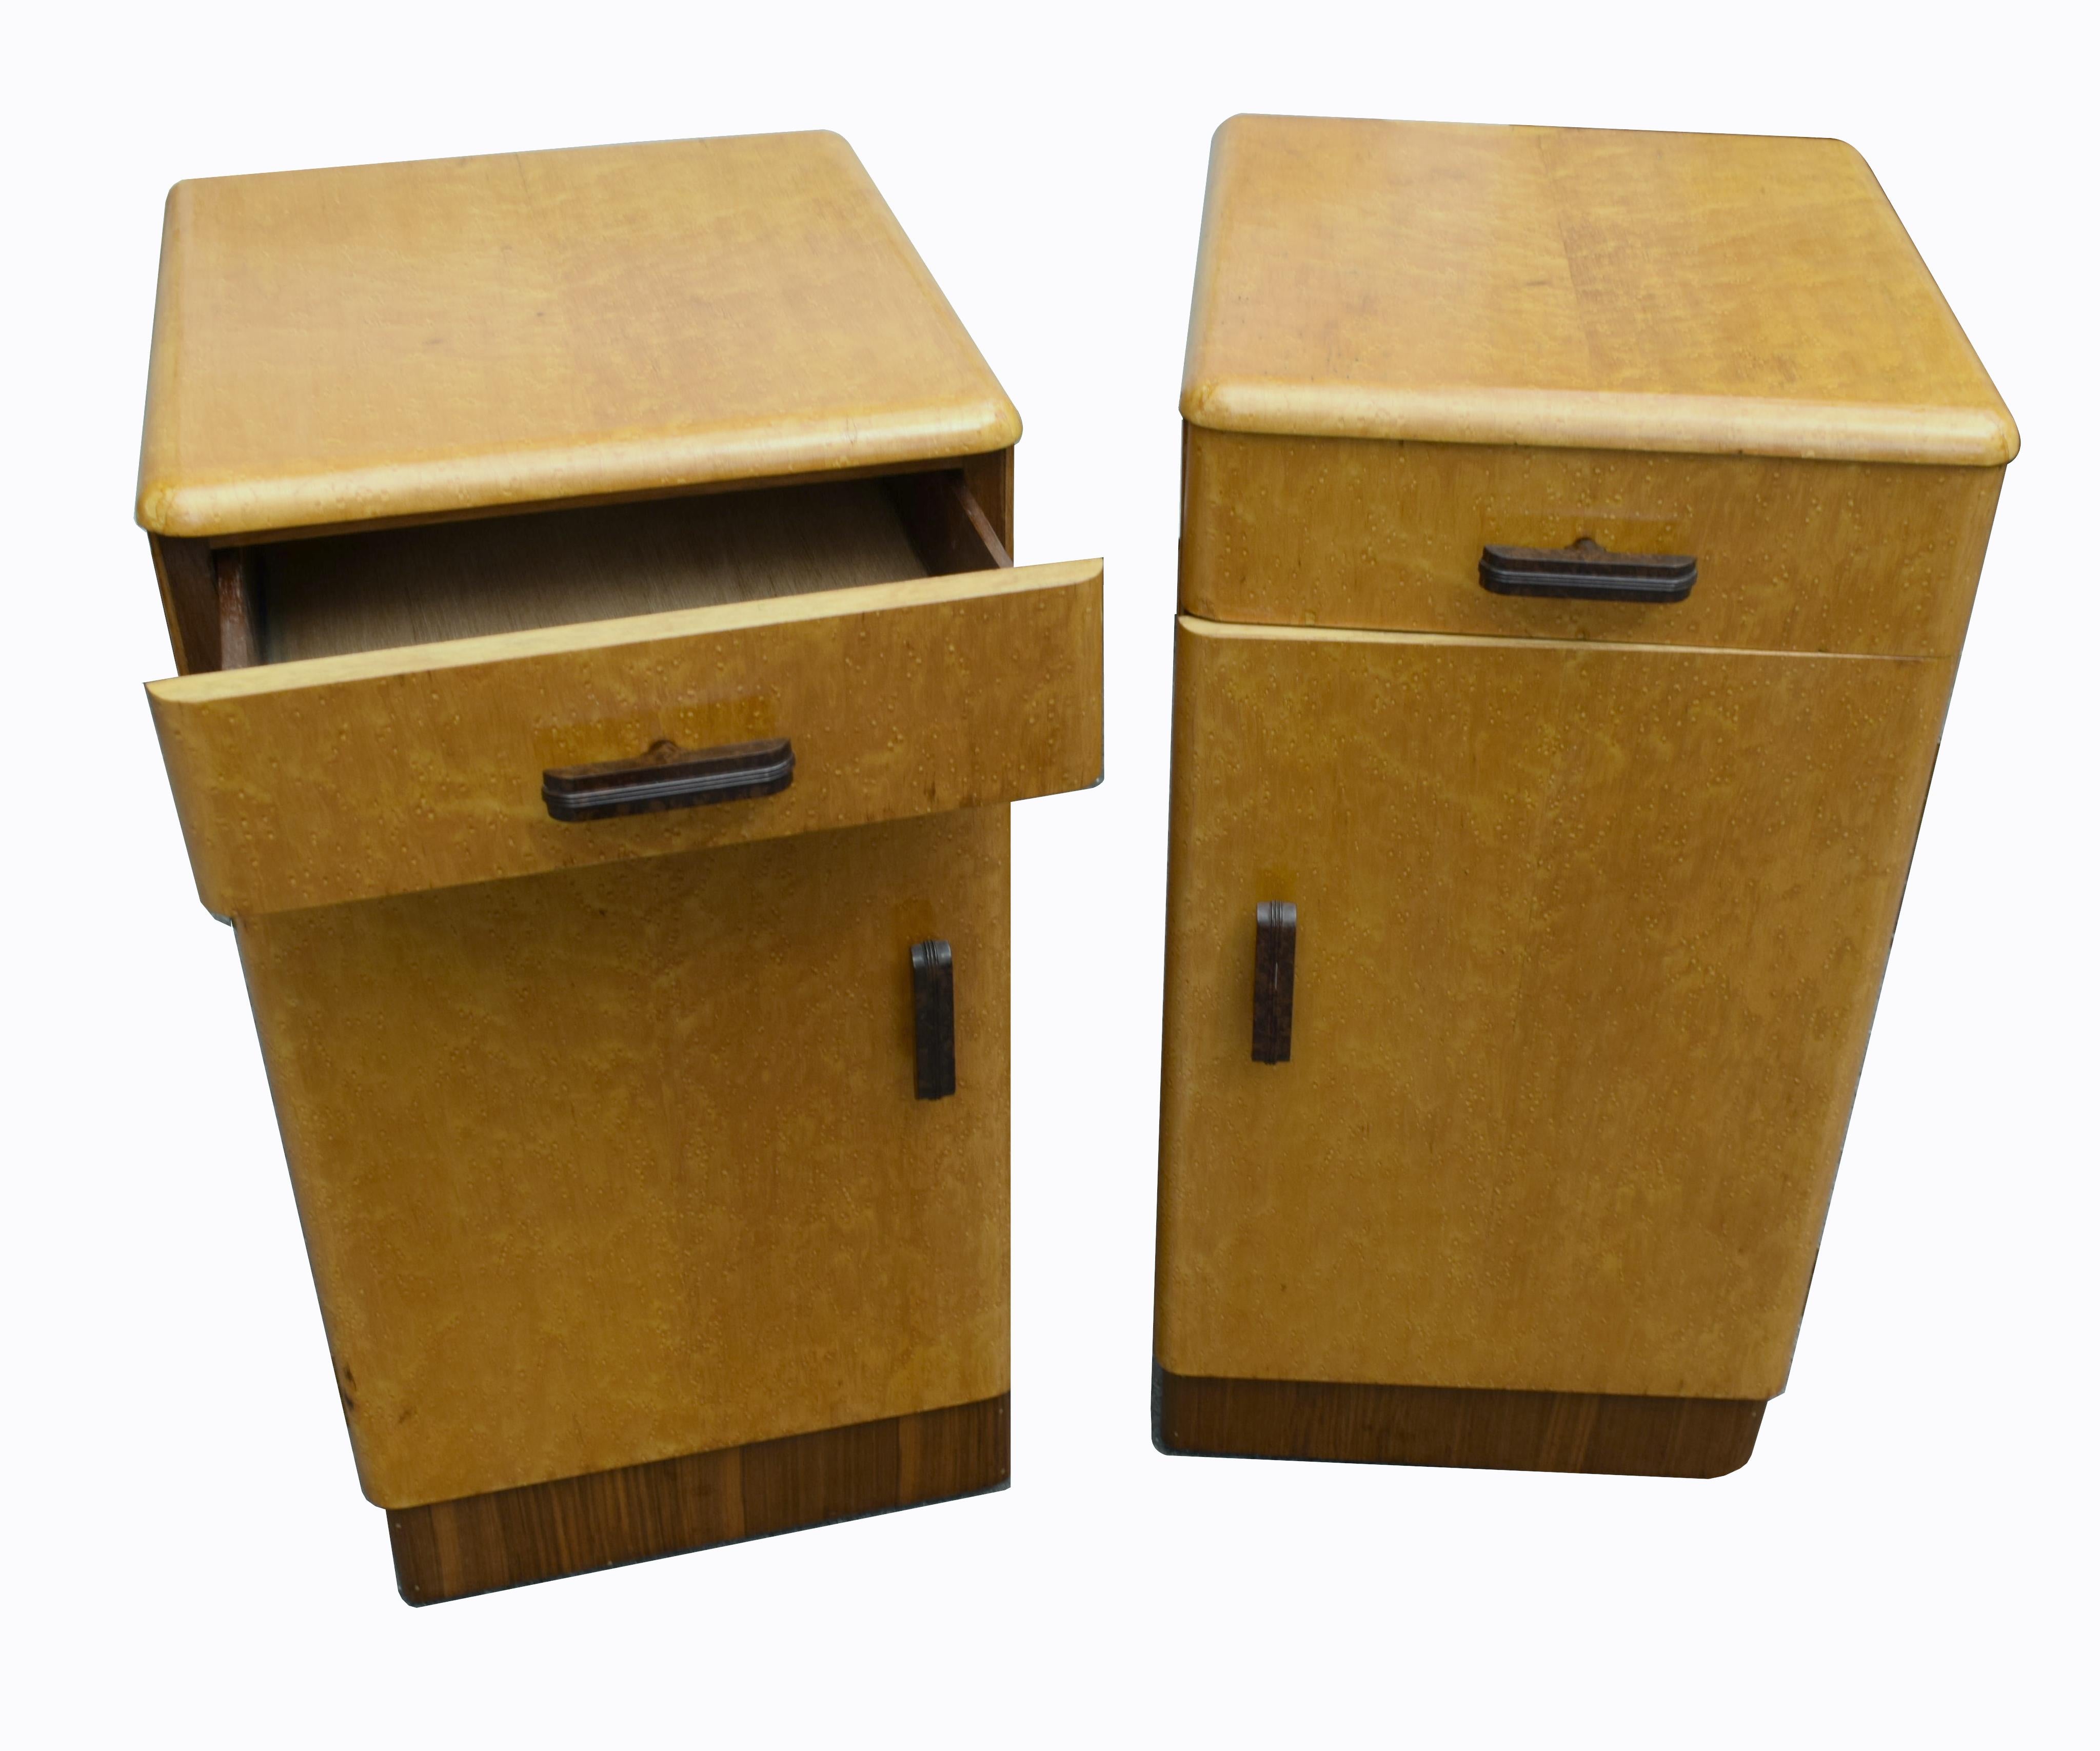 English Pair of Matching 1930s Art Deco Bedside Cabinet Tables in Blonde Maple